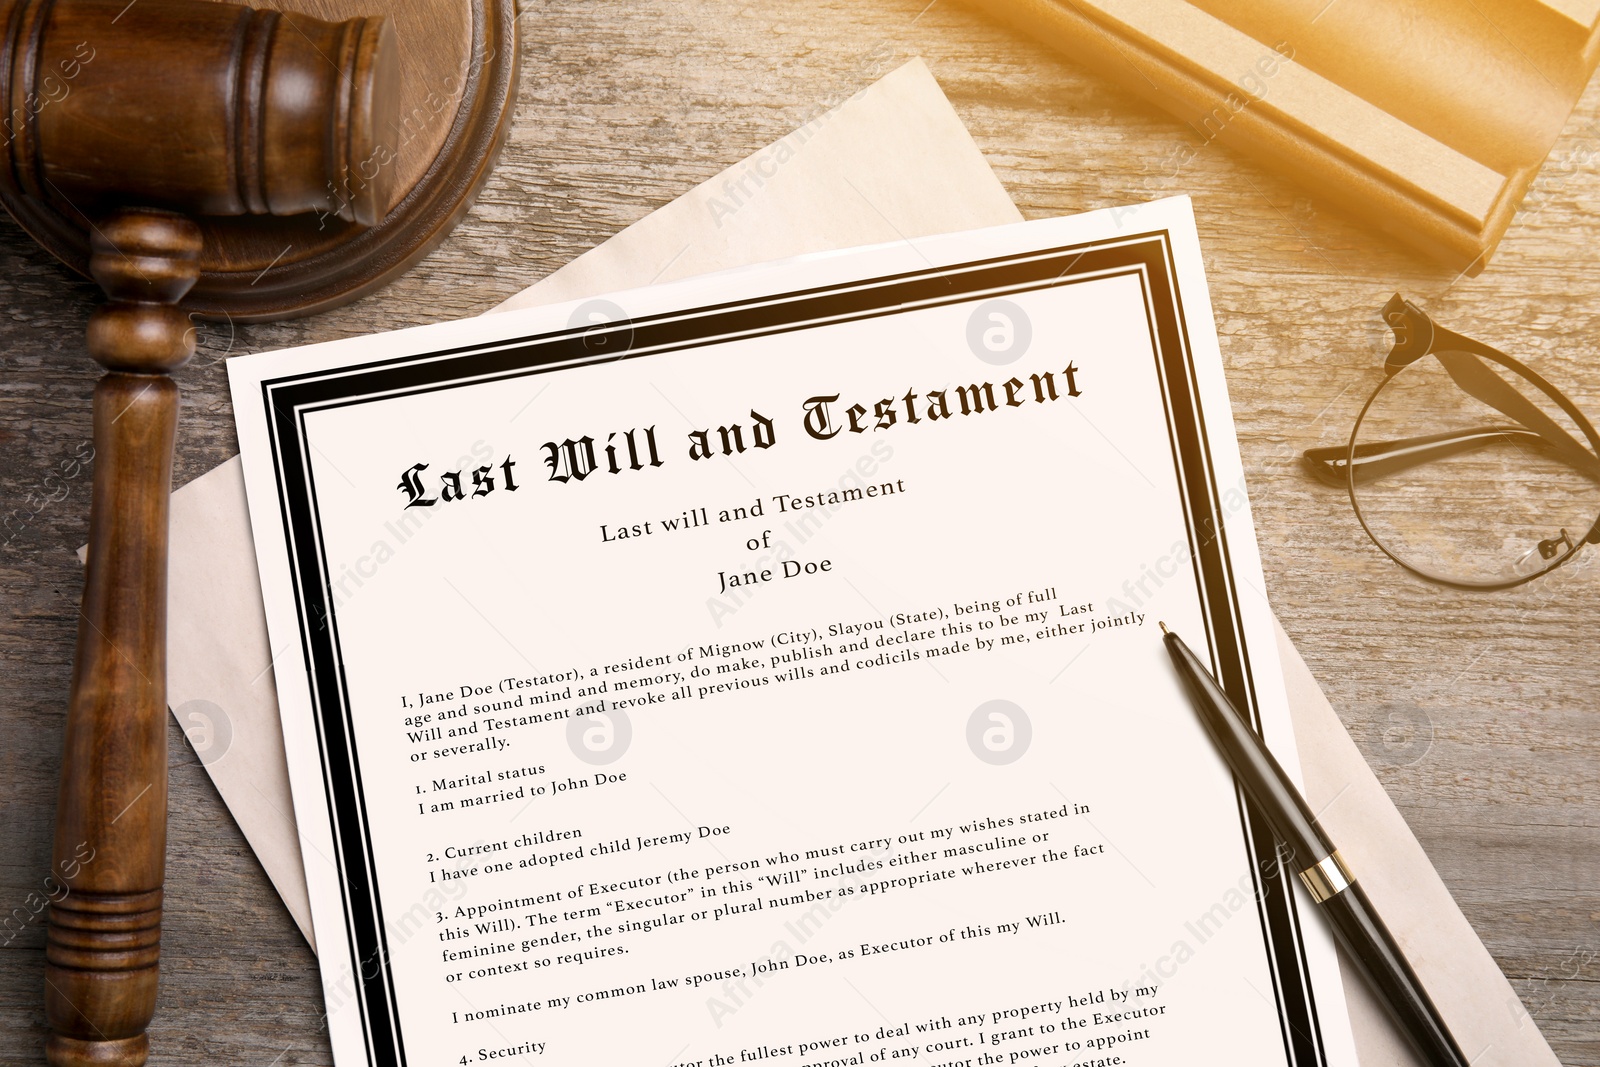 Image of Last Will and Testament, pen, gavel and glasses on wooden table, flat lay